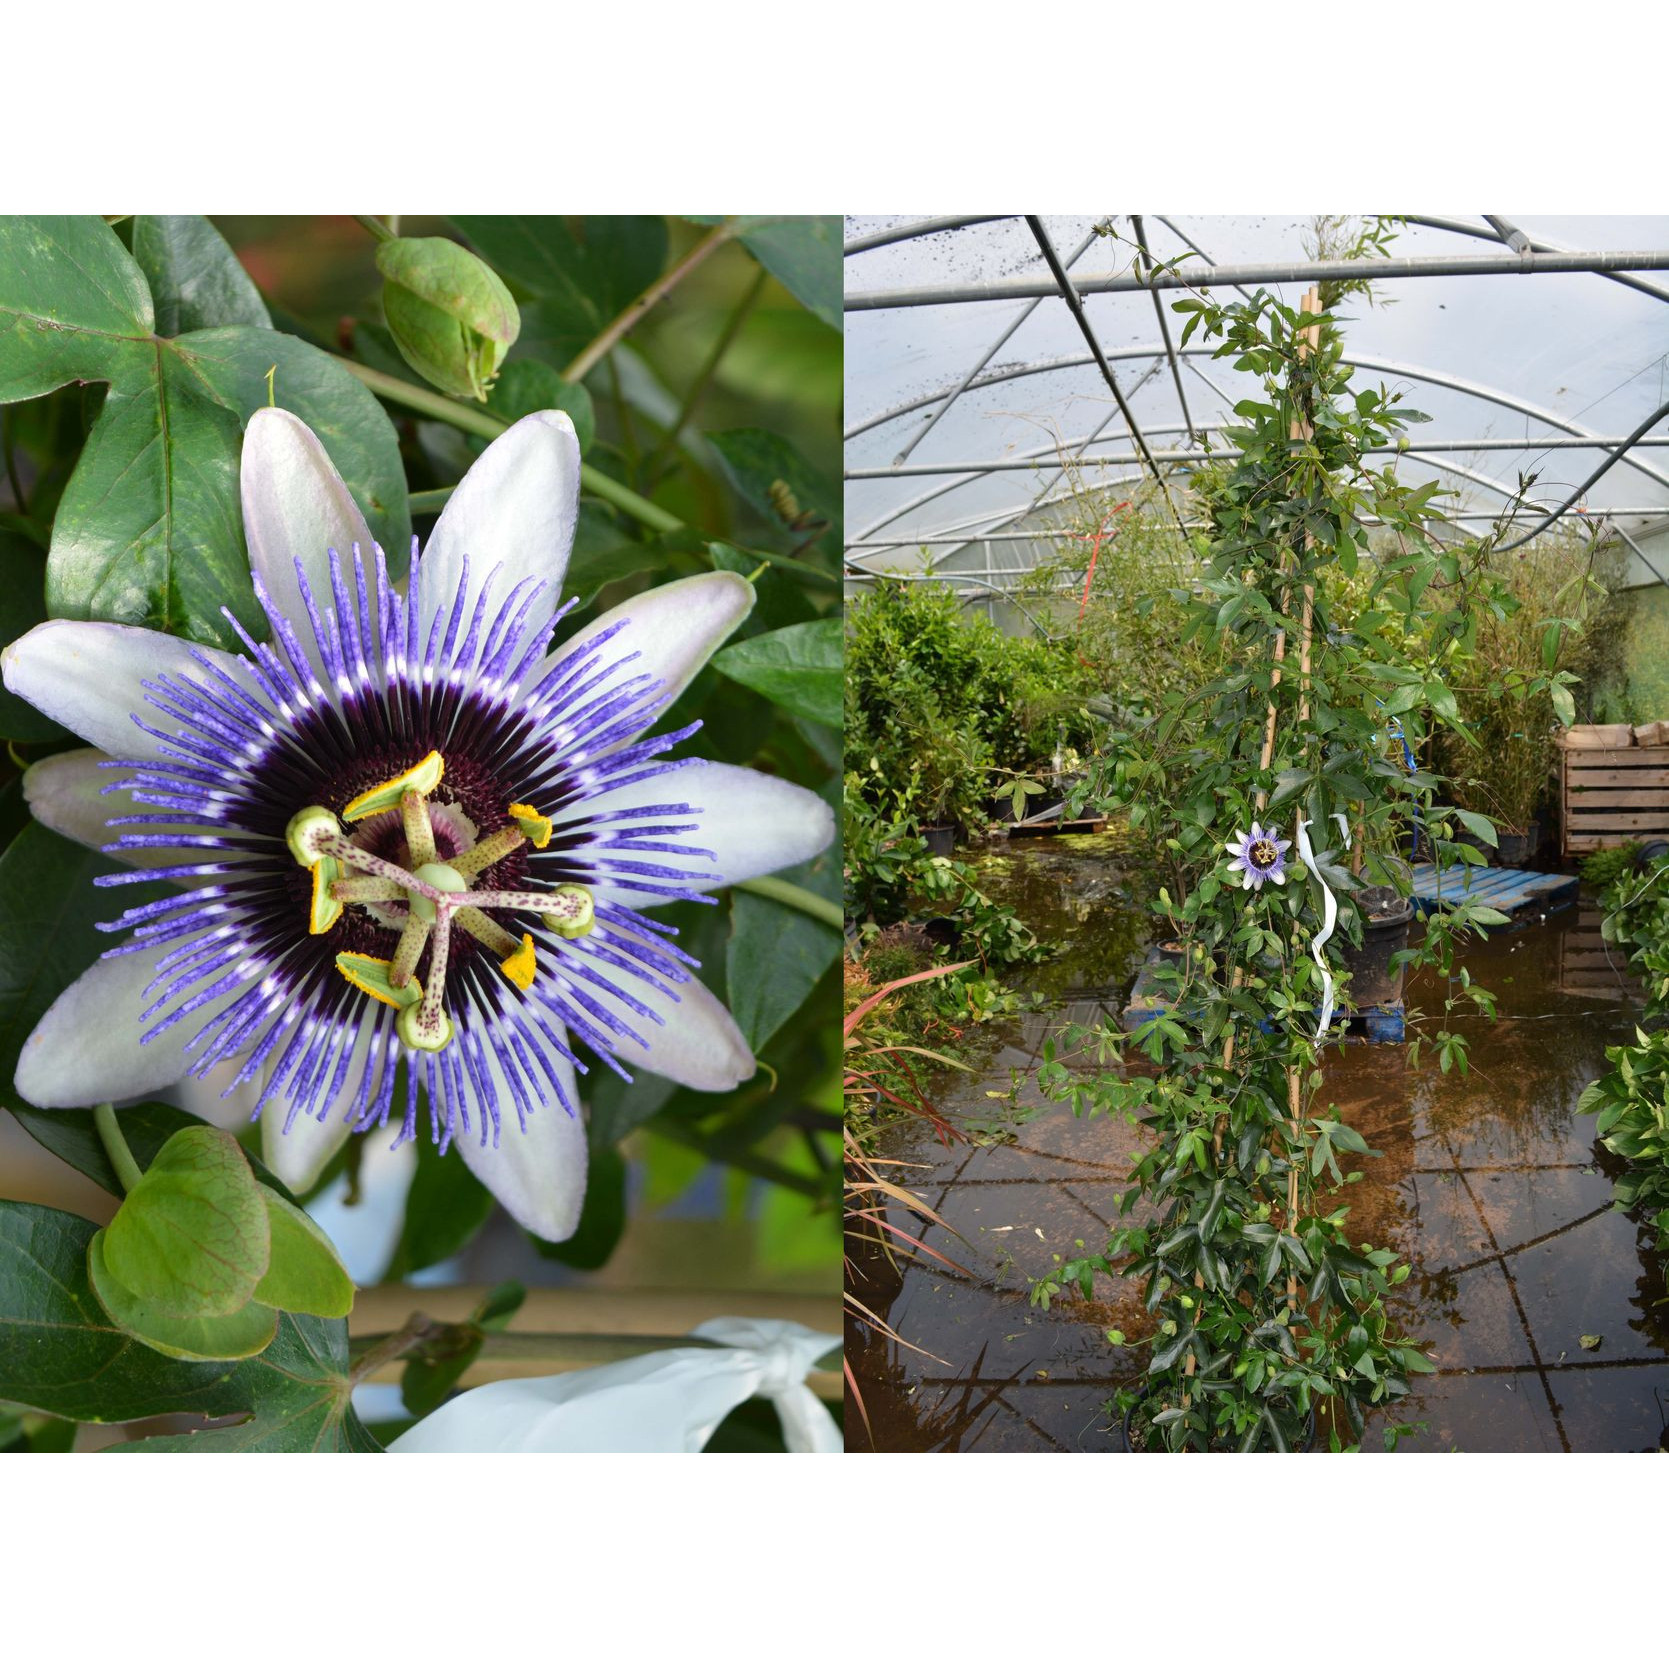 Passiflora caerulea 175-200, C10 3 canes - SOLD OUT